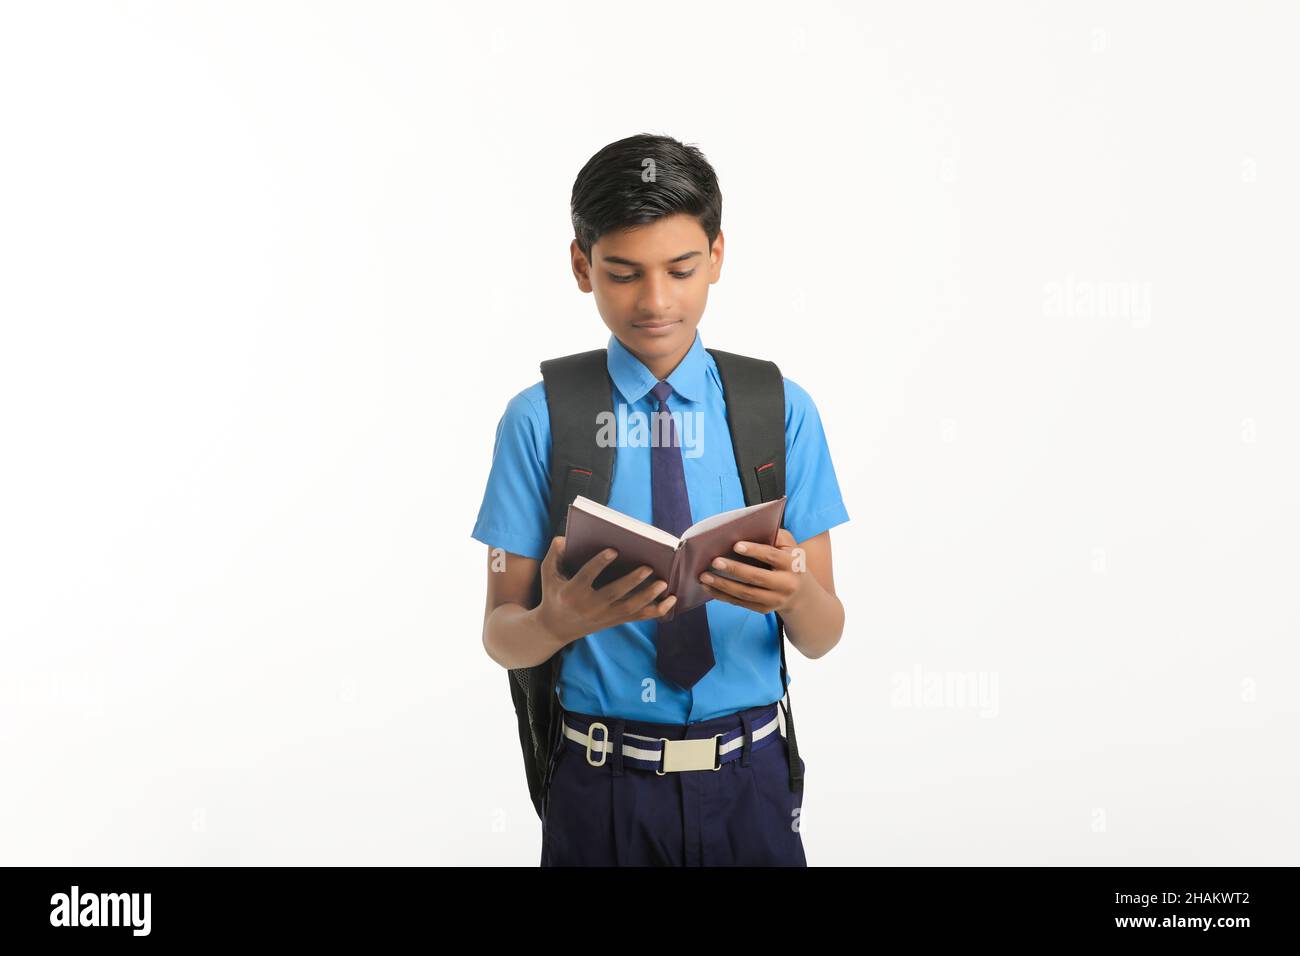 Indian school boy in uniform and reading diary on white background. Stock Photo